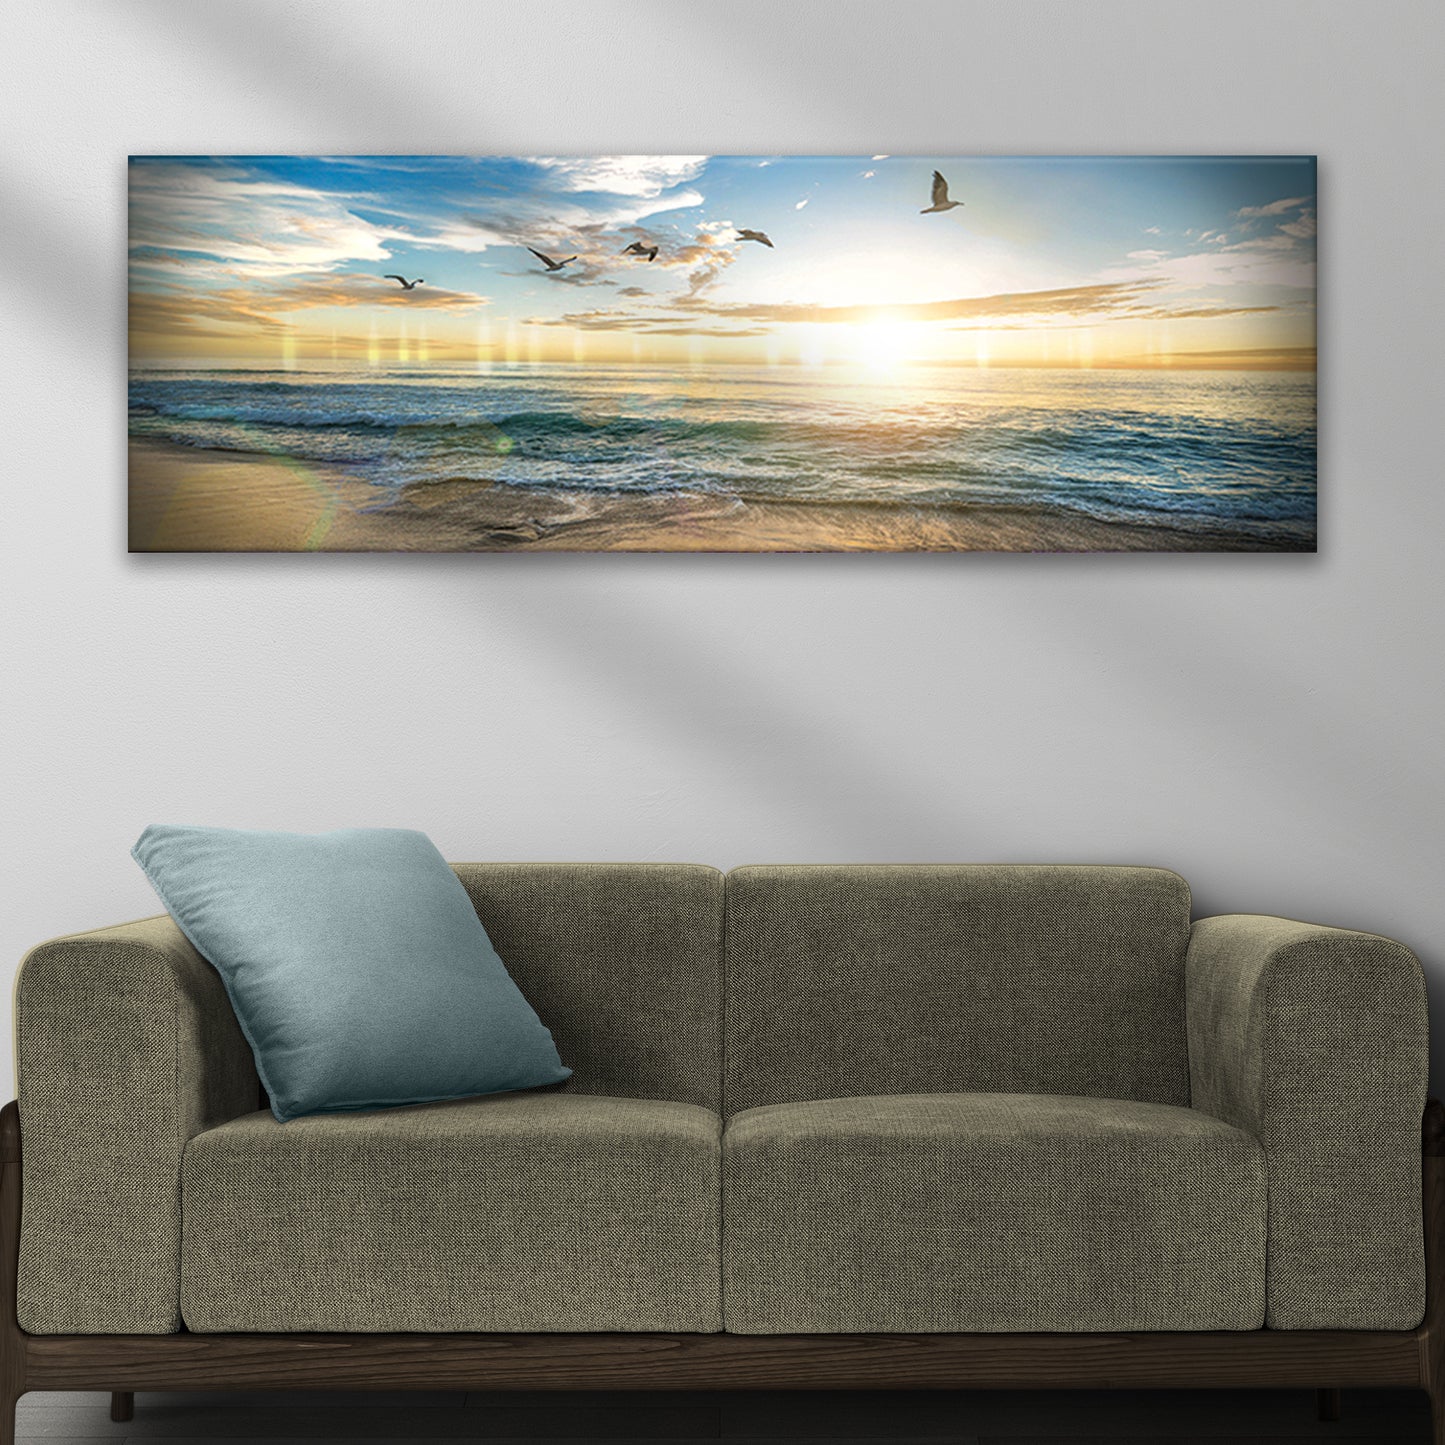 Gulf Coast At Sunset Canvas Wall Art - Image by Tailored Canvases